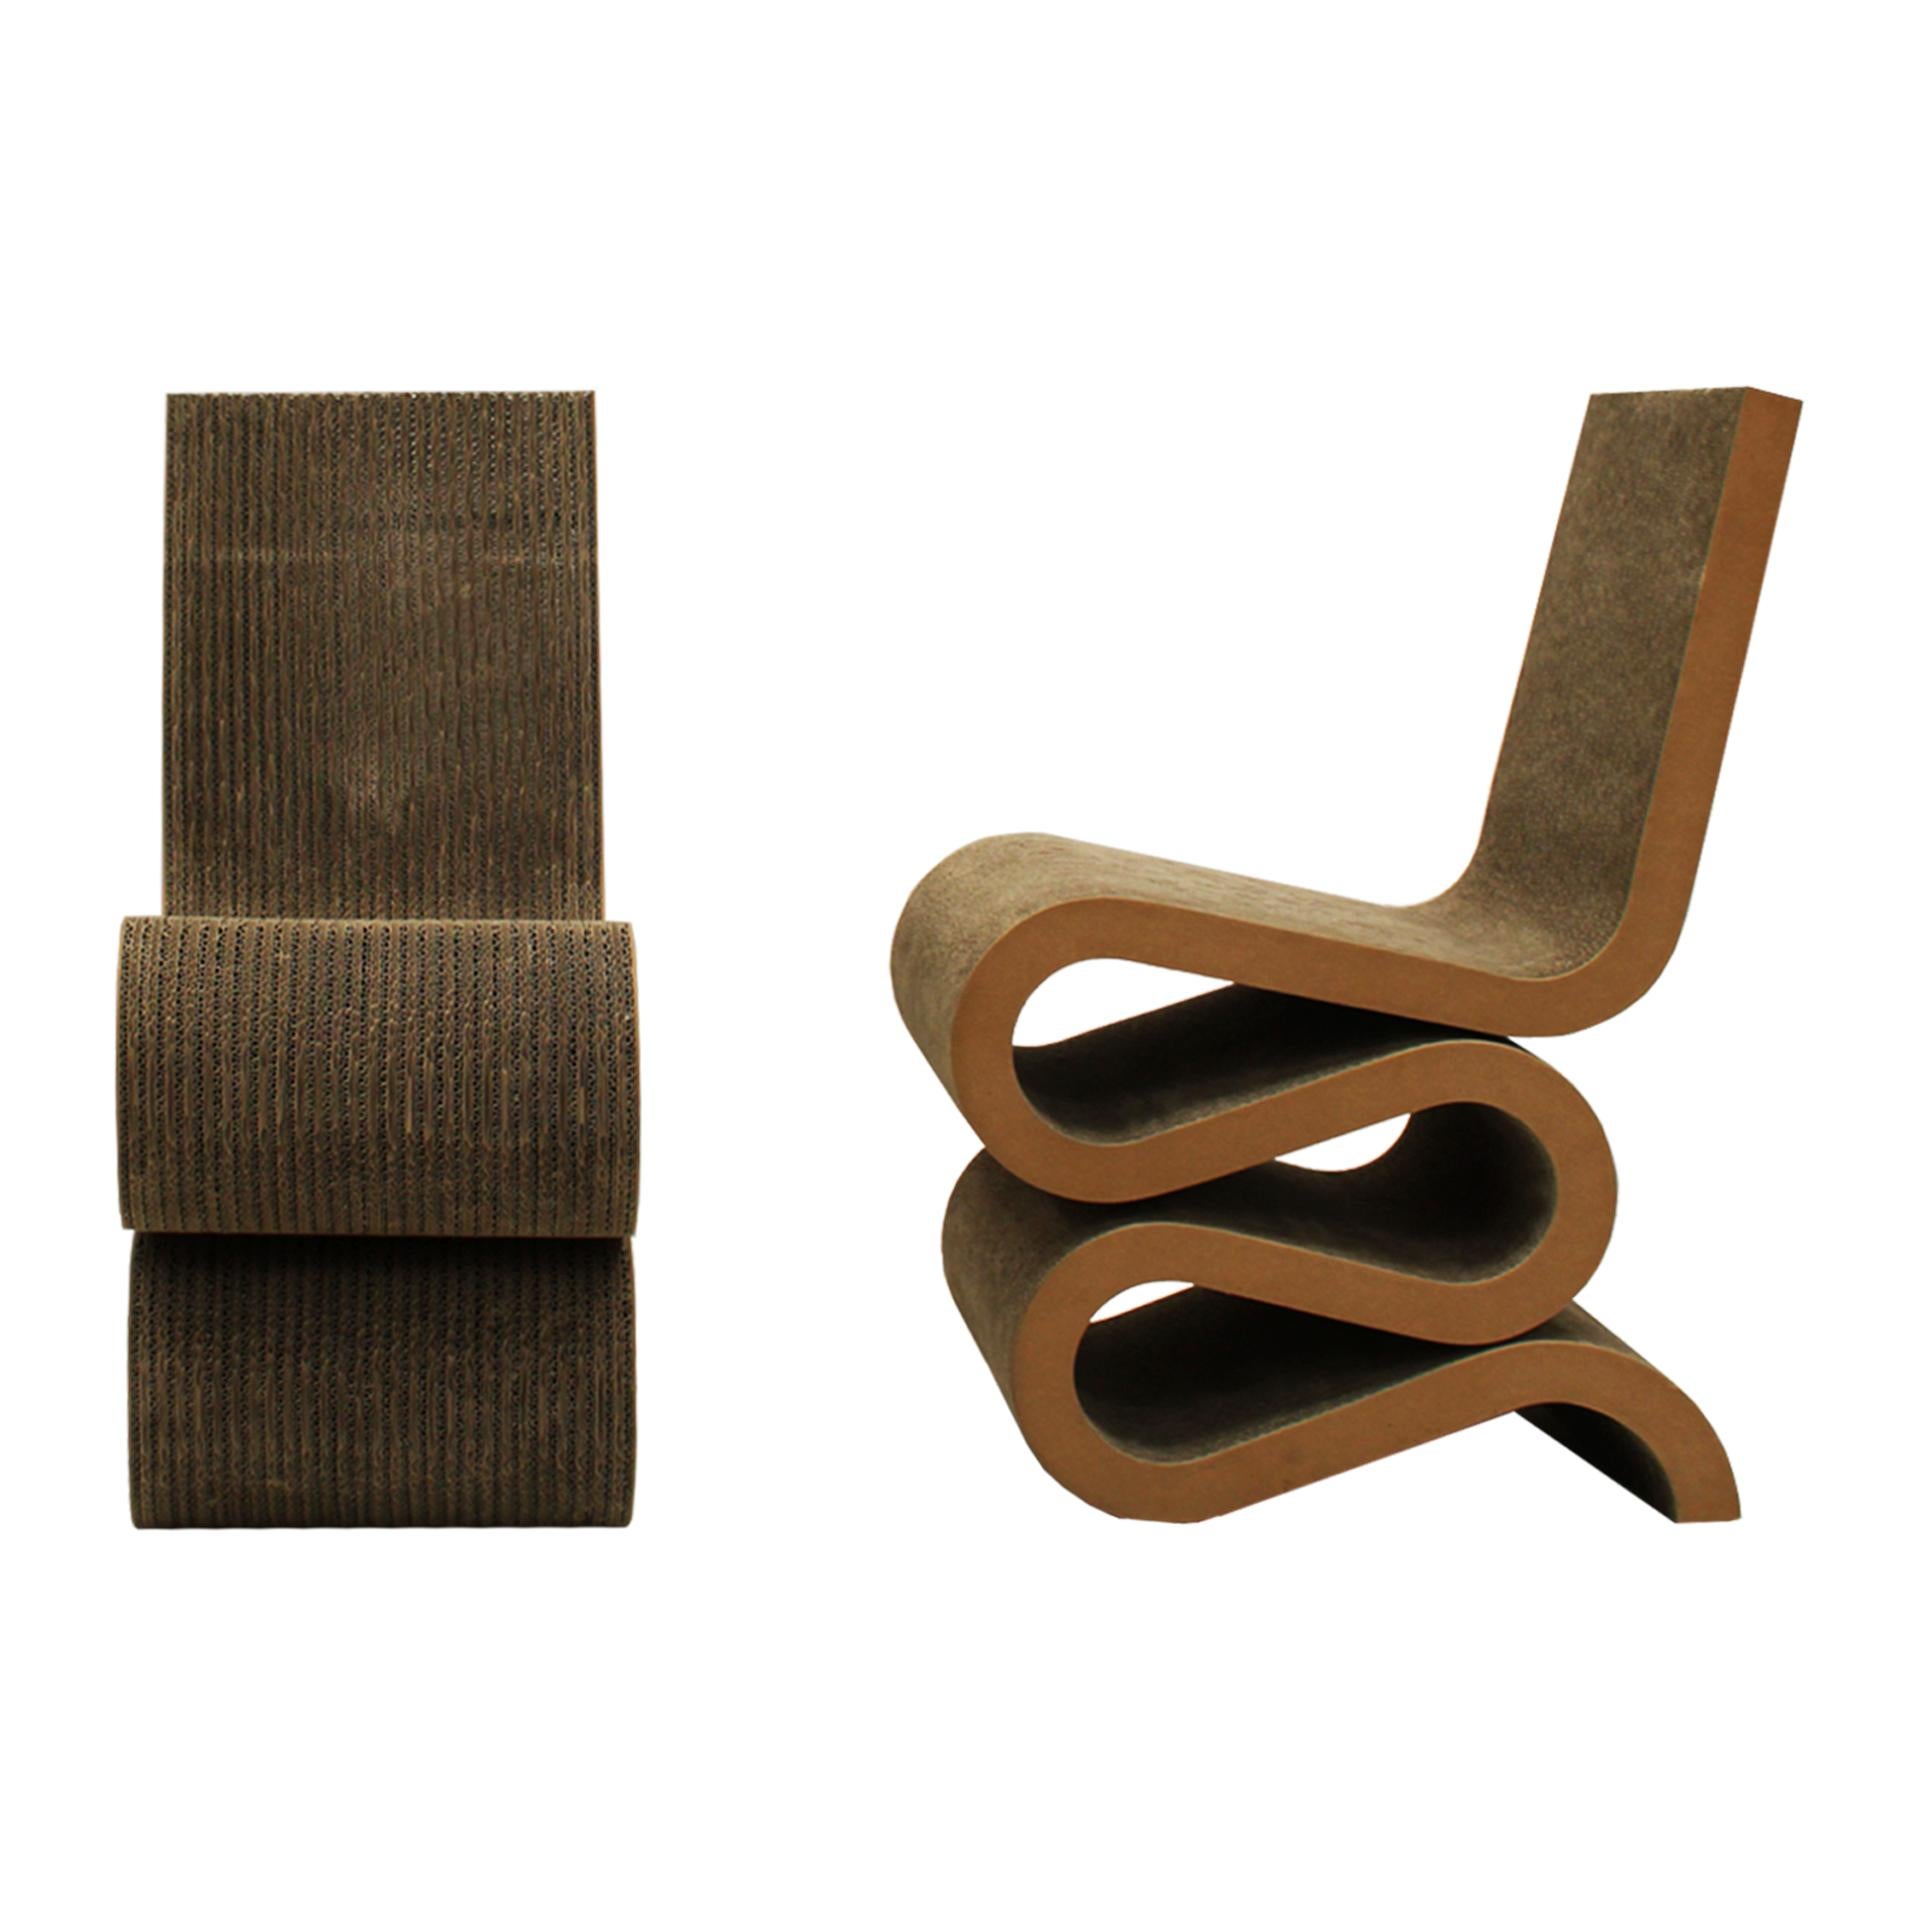 Pair of Wiggle side chairs designed by Frank Gehry 1972 for Jack Brogan, USA 1972-1973. Its design is characterised by curved shapes made of corrugated cardboard.